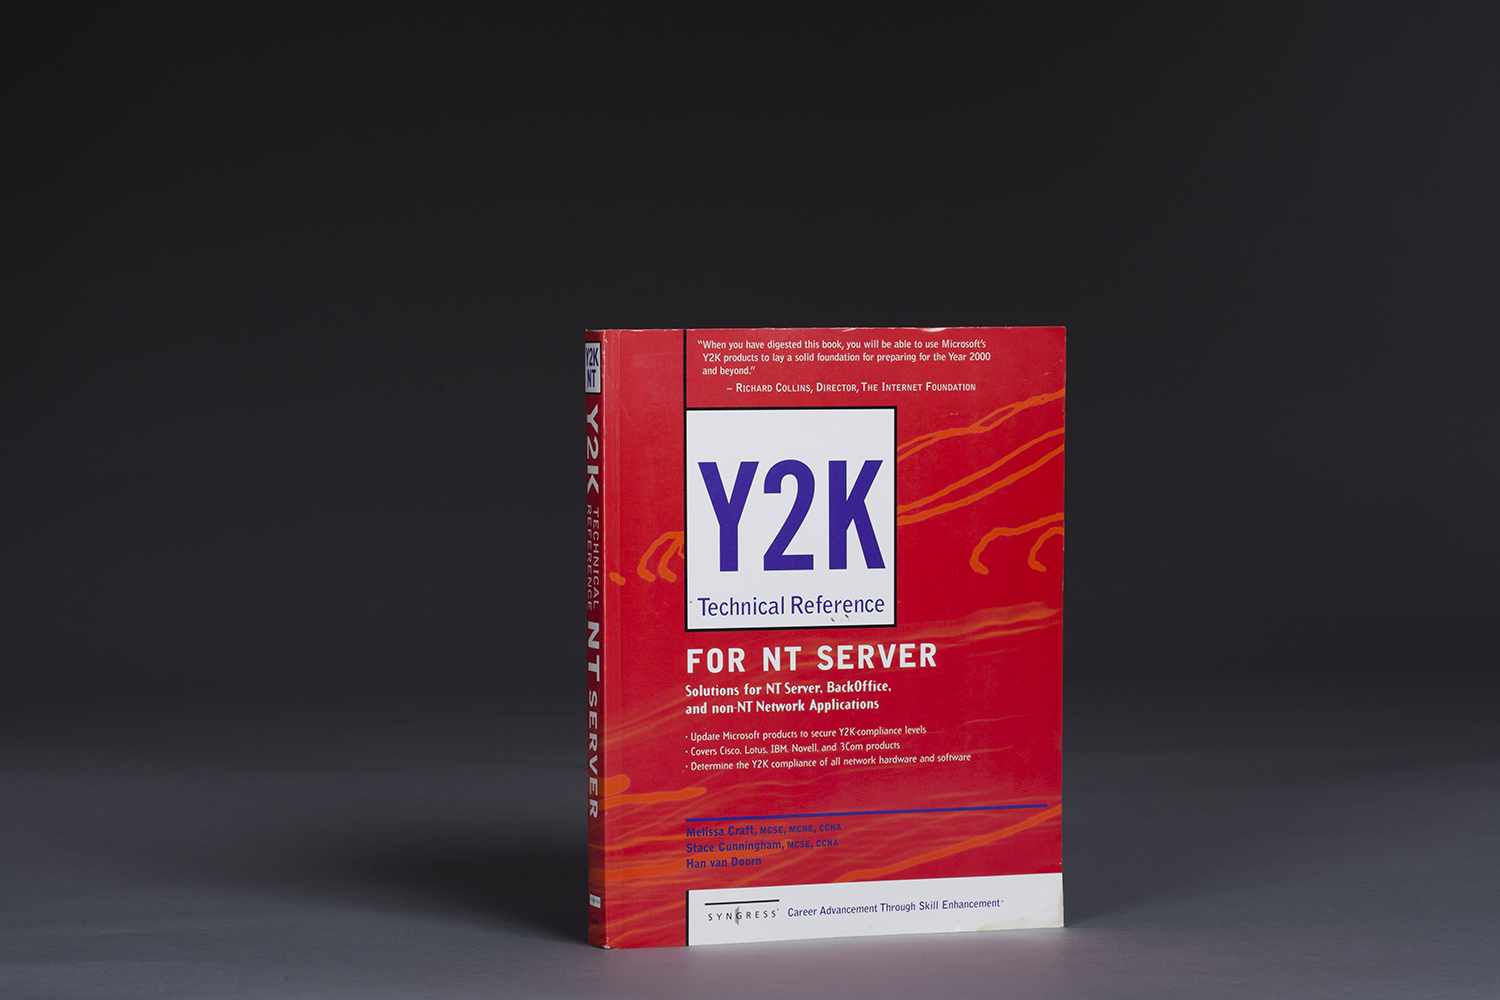 Y2K Technical Reference for NT Server - 0108 Cover.jpg